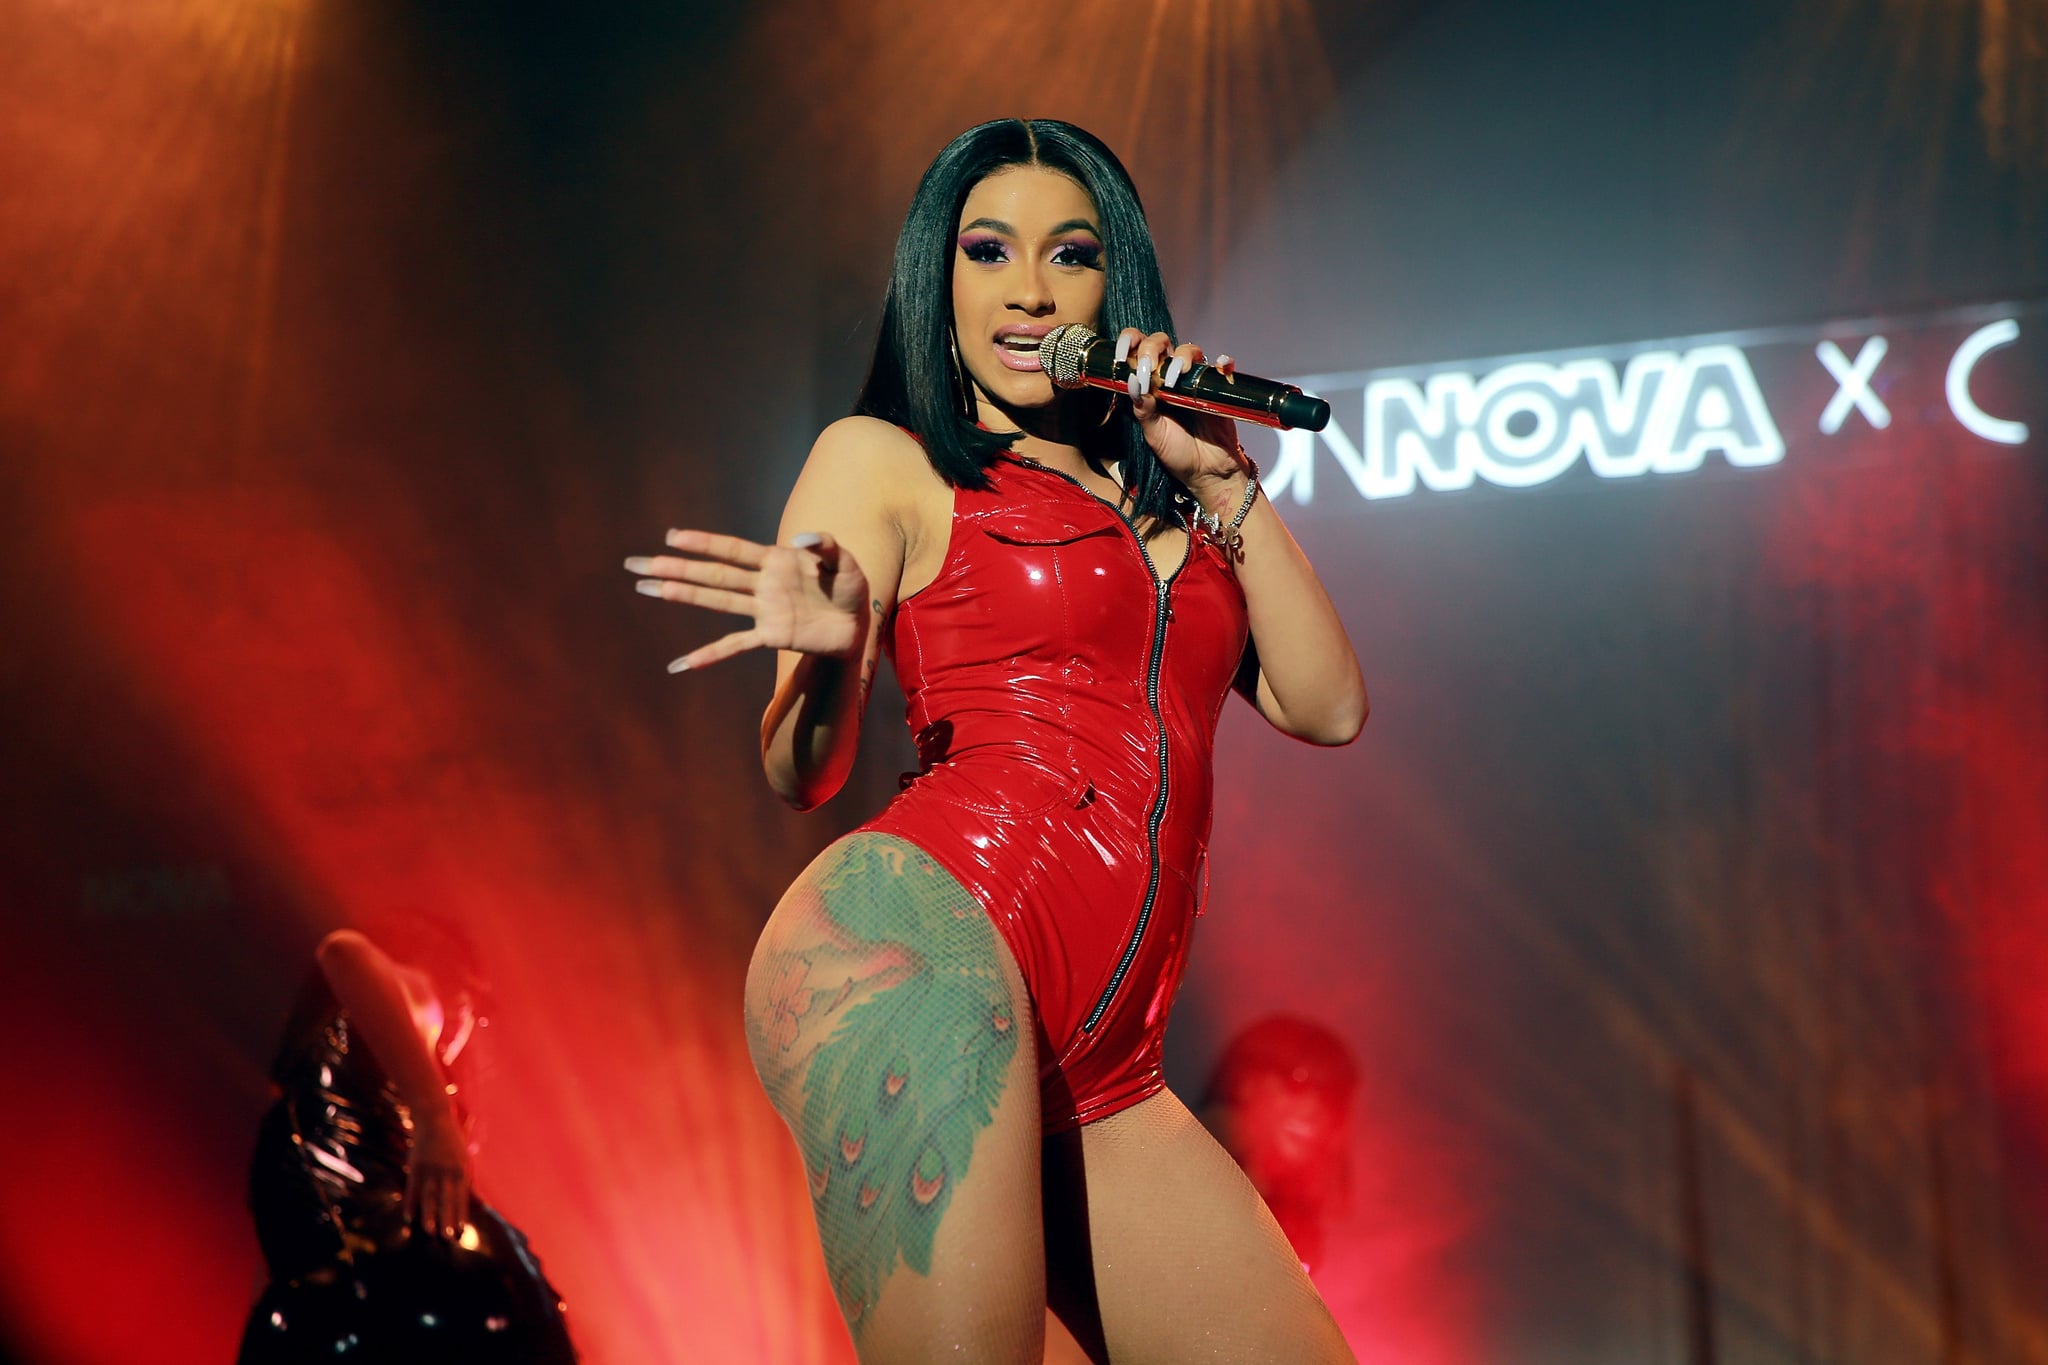 HOLLYWOOD, CA - NOVEMBER 14:  Cardi B performs onstage during the Fashion Nova x Cardi B Collaboration Launch Event at Boulevard3 on November 14, 2018 in Hollywood, California.  (Photo by Rich Fury/Getty Images for Fashion Nova)